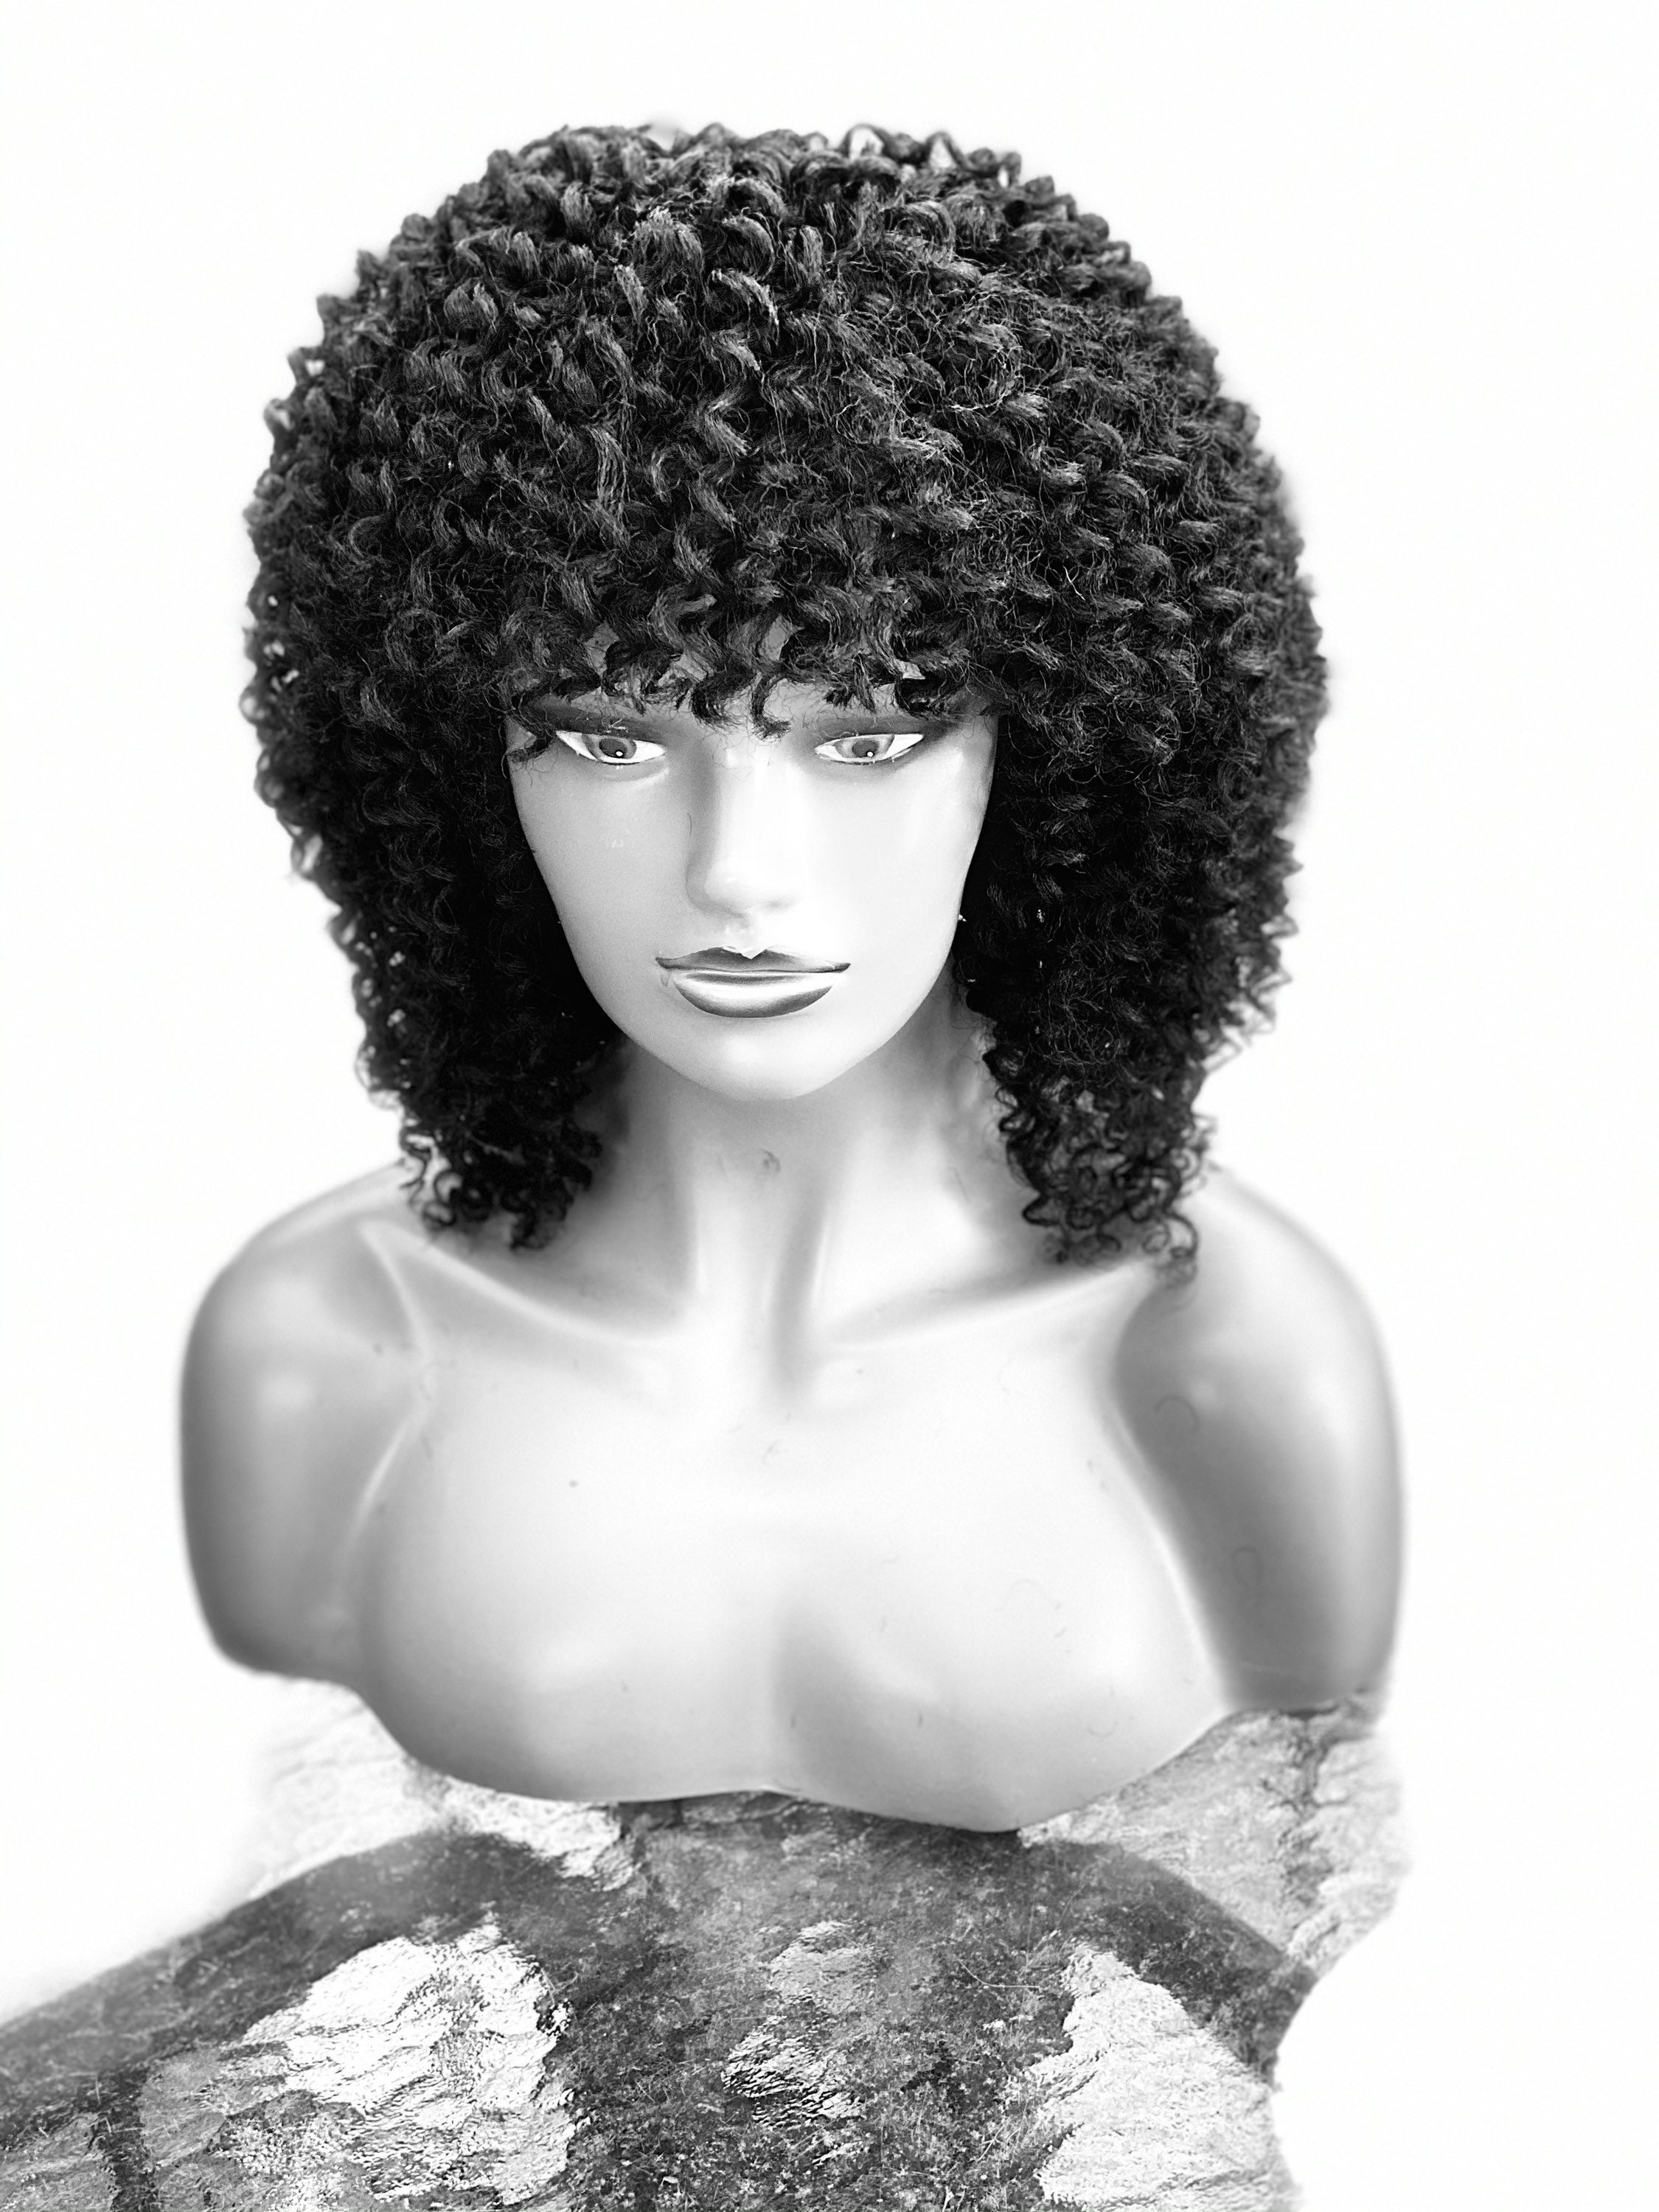 Handmade Human Hair Blend Wig With A Bang.just As Pictured